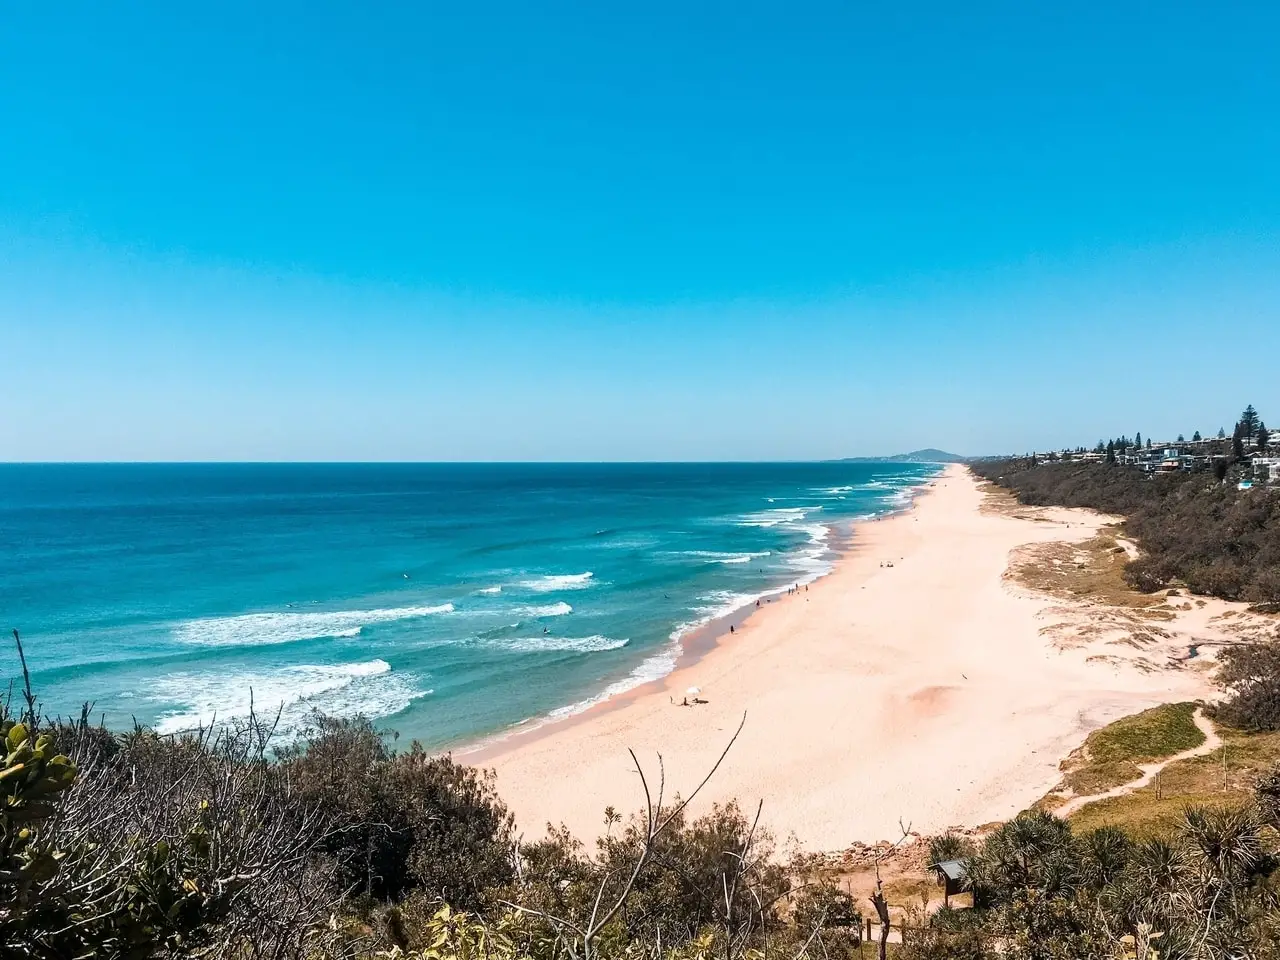 Hiking in Noosa National Park